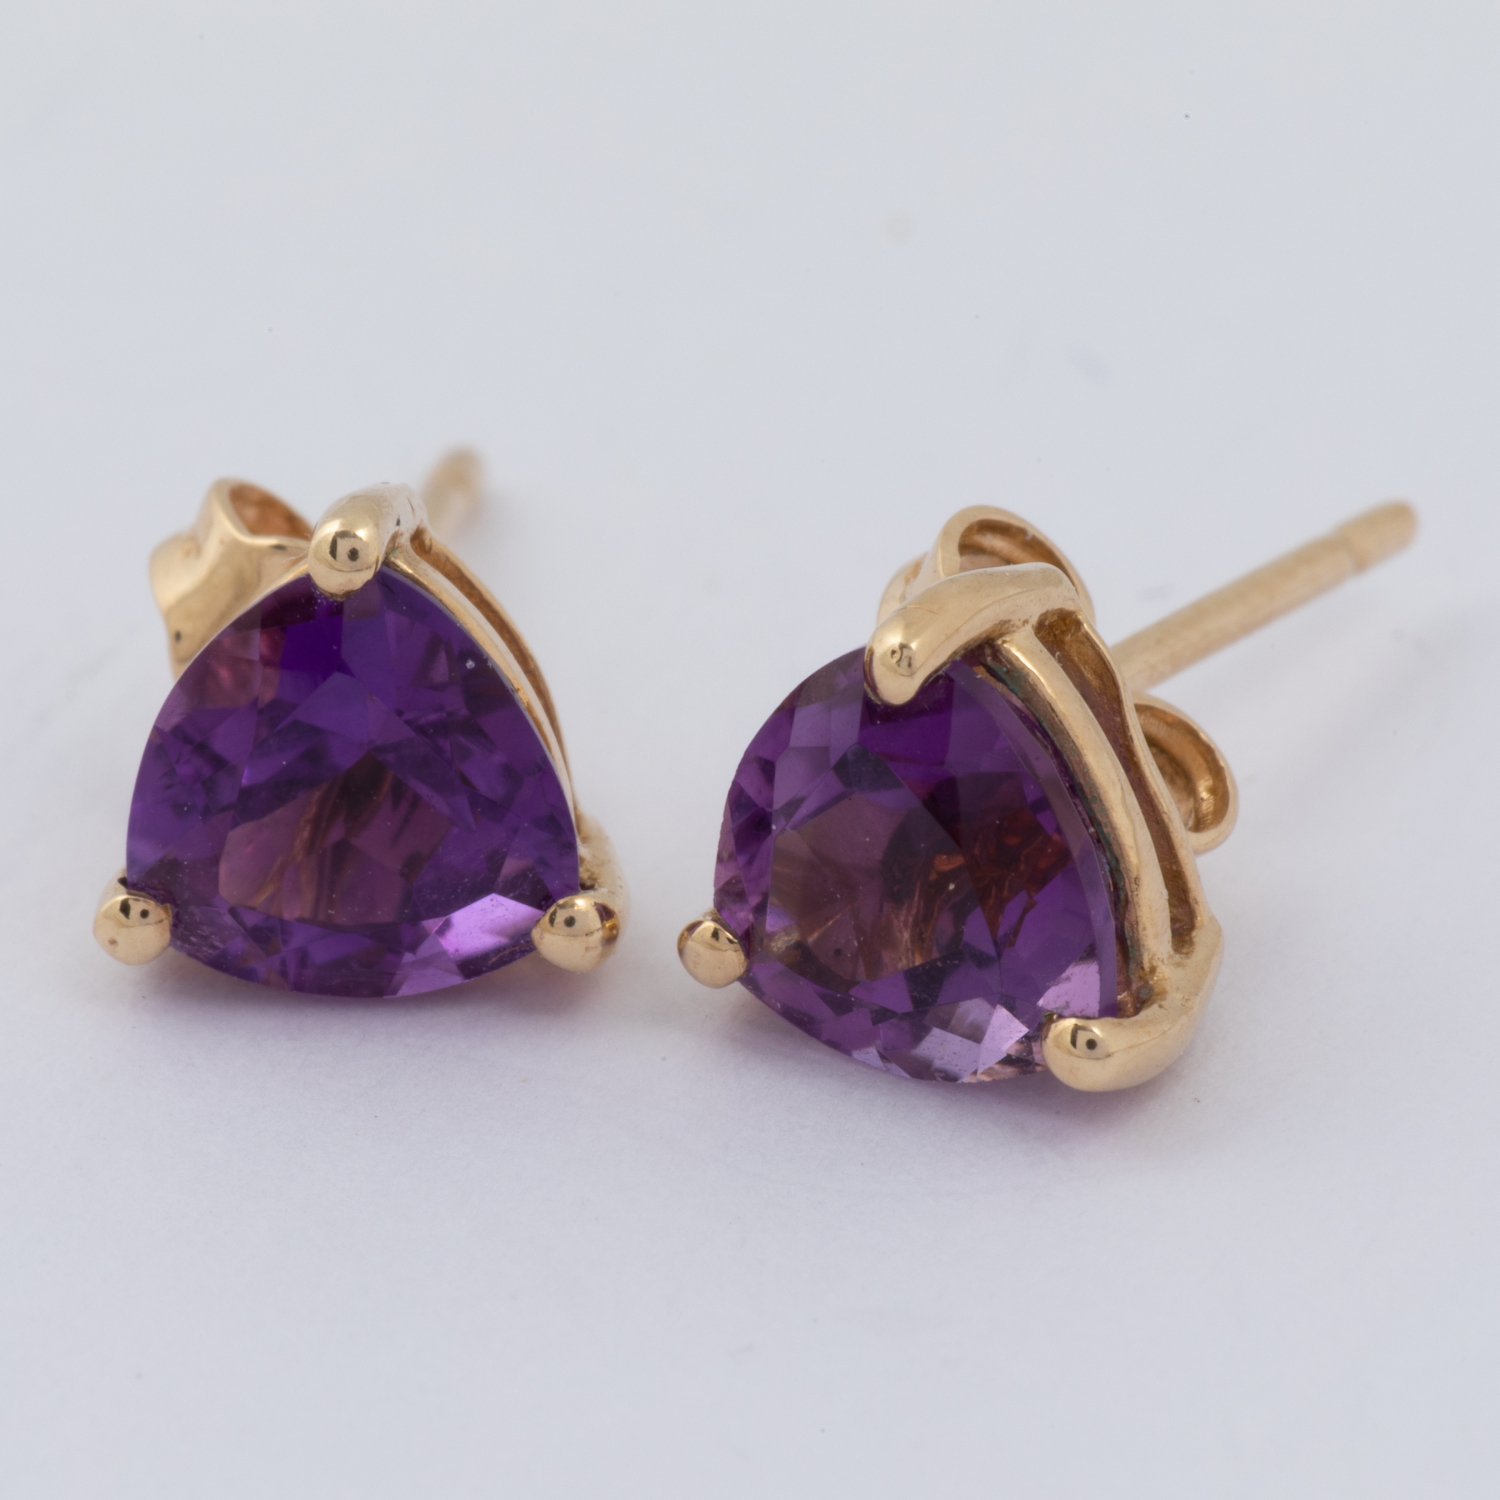 A pair of 9ct yellow gold stud earrings set with triangular shaped amethyst, post & butterfly